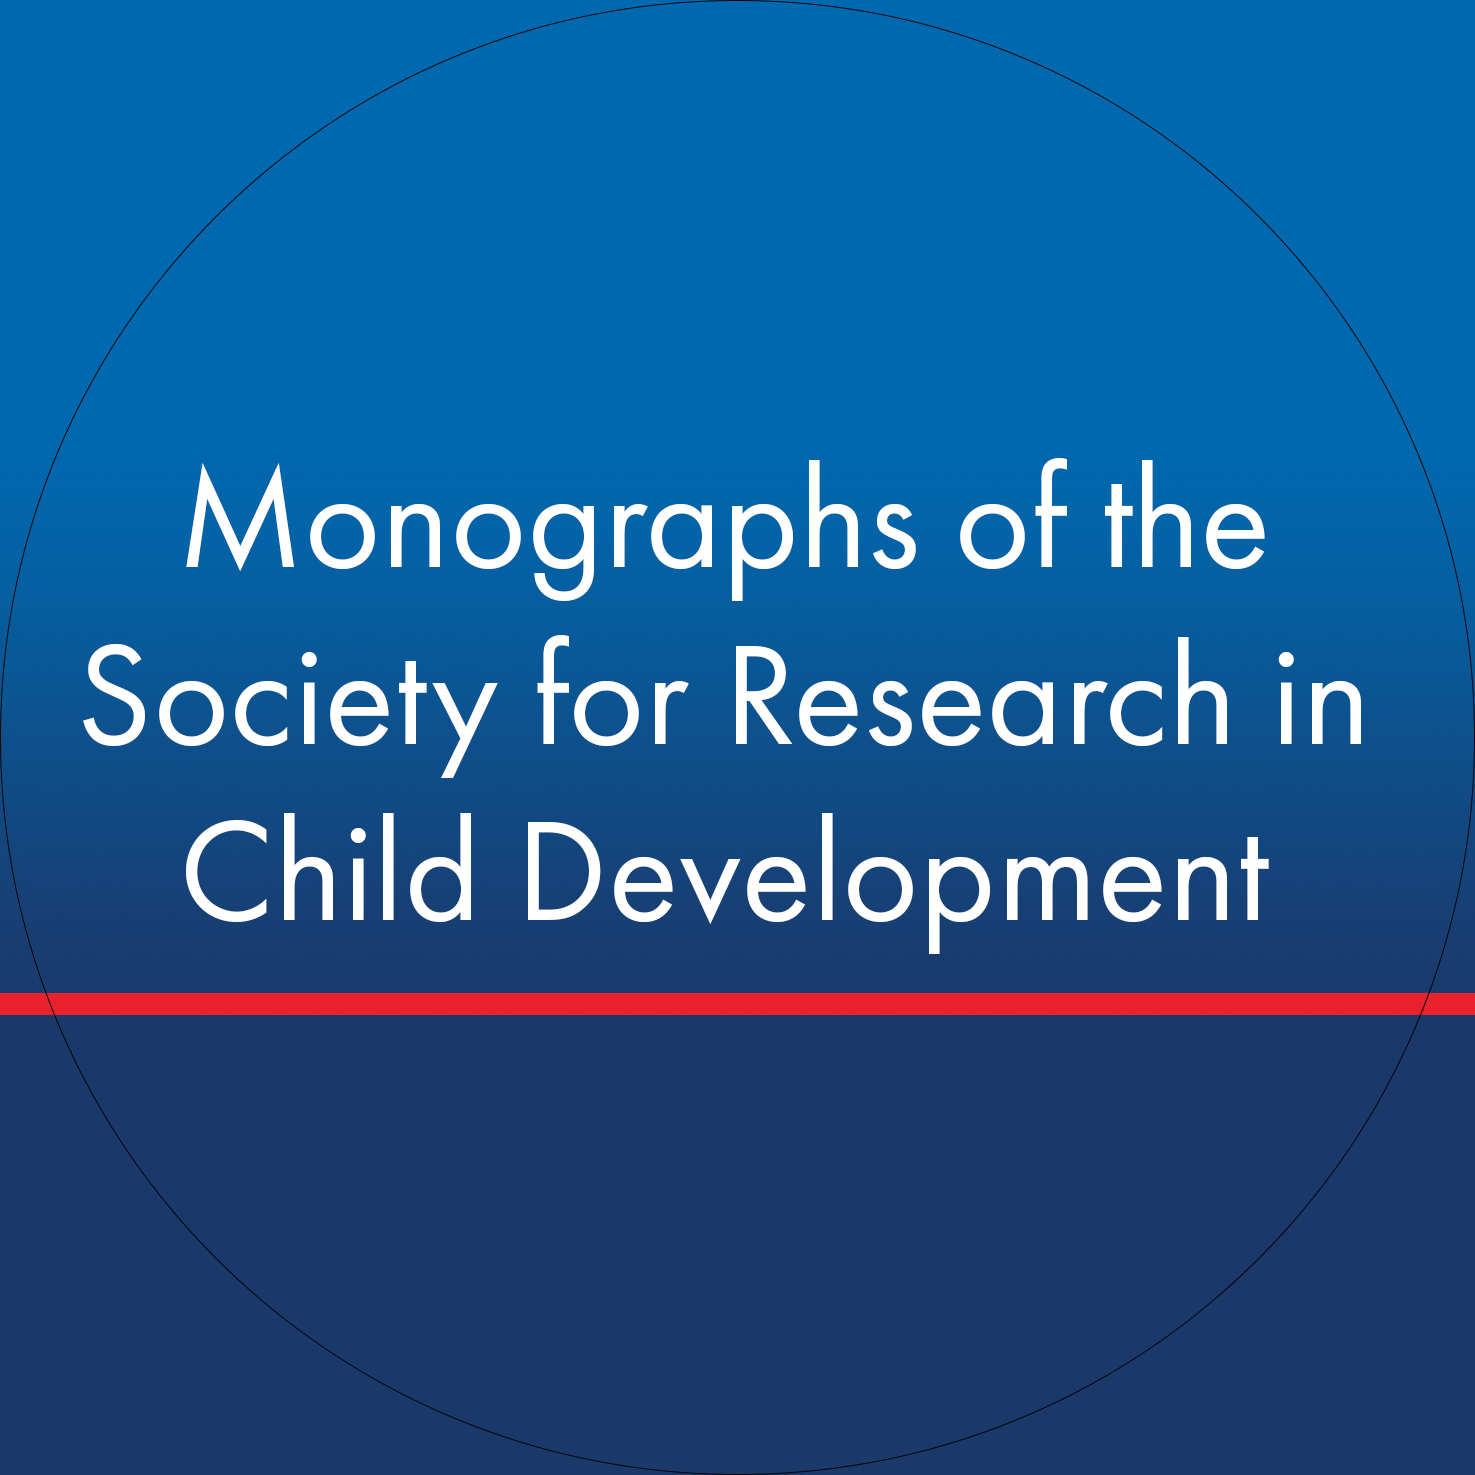 society for research on child development